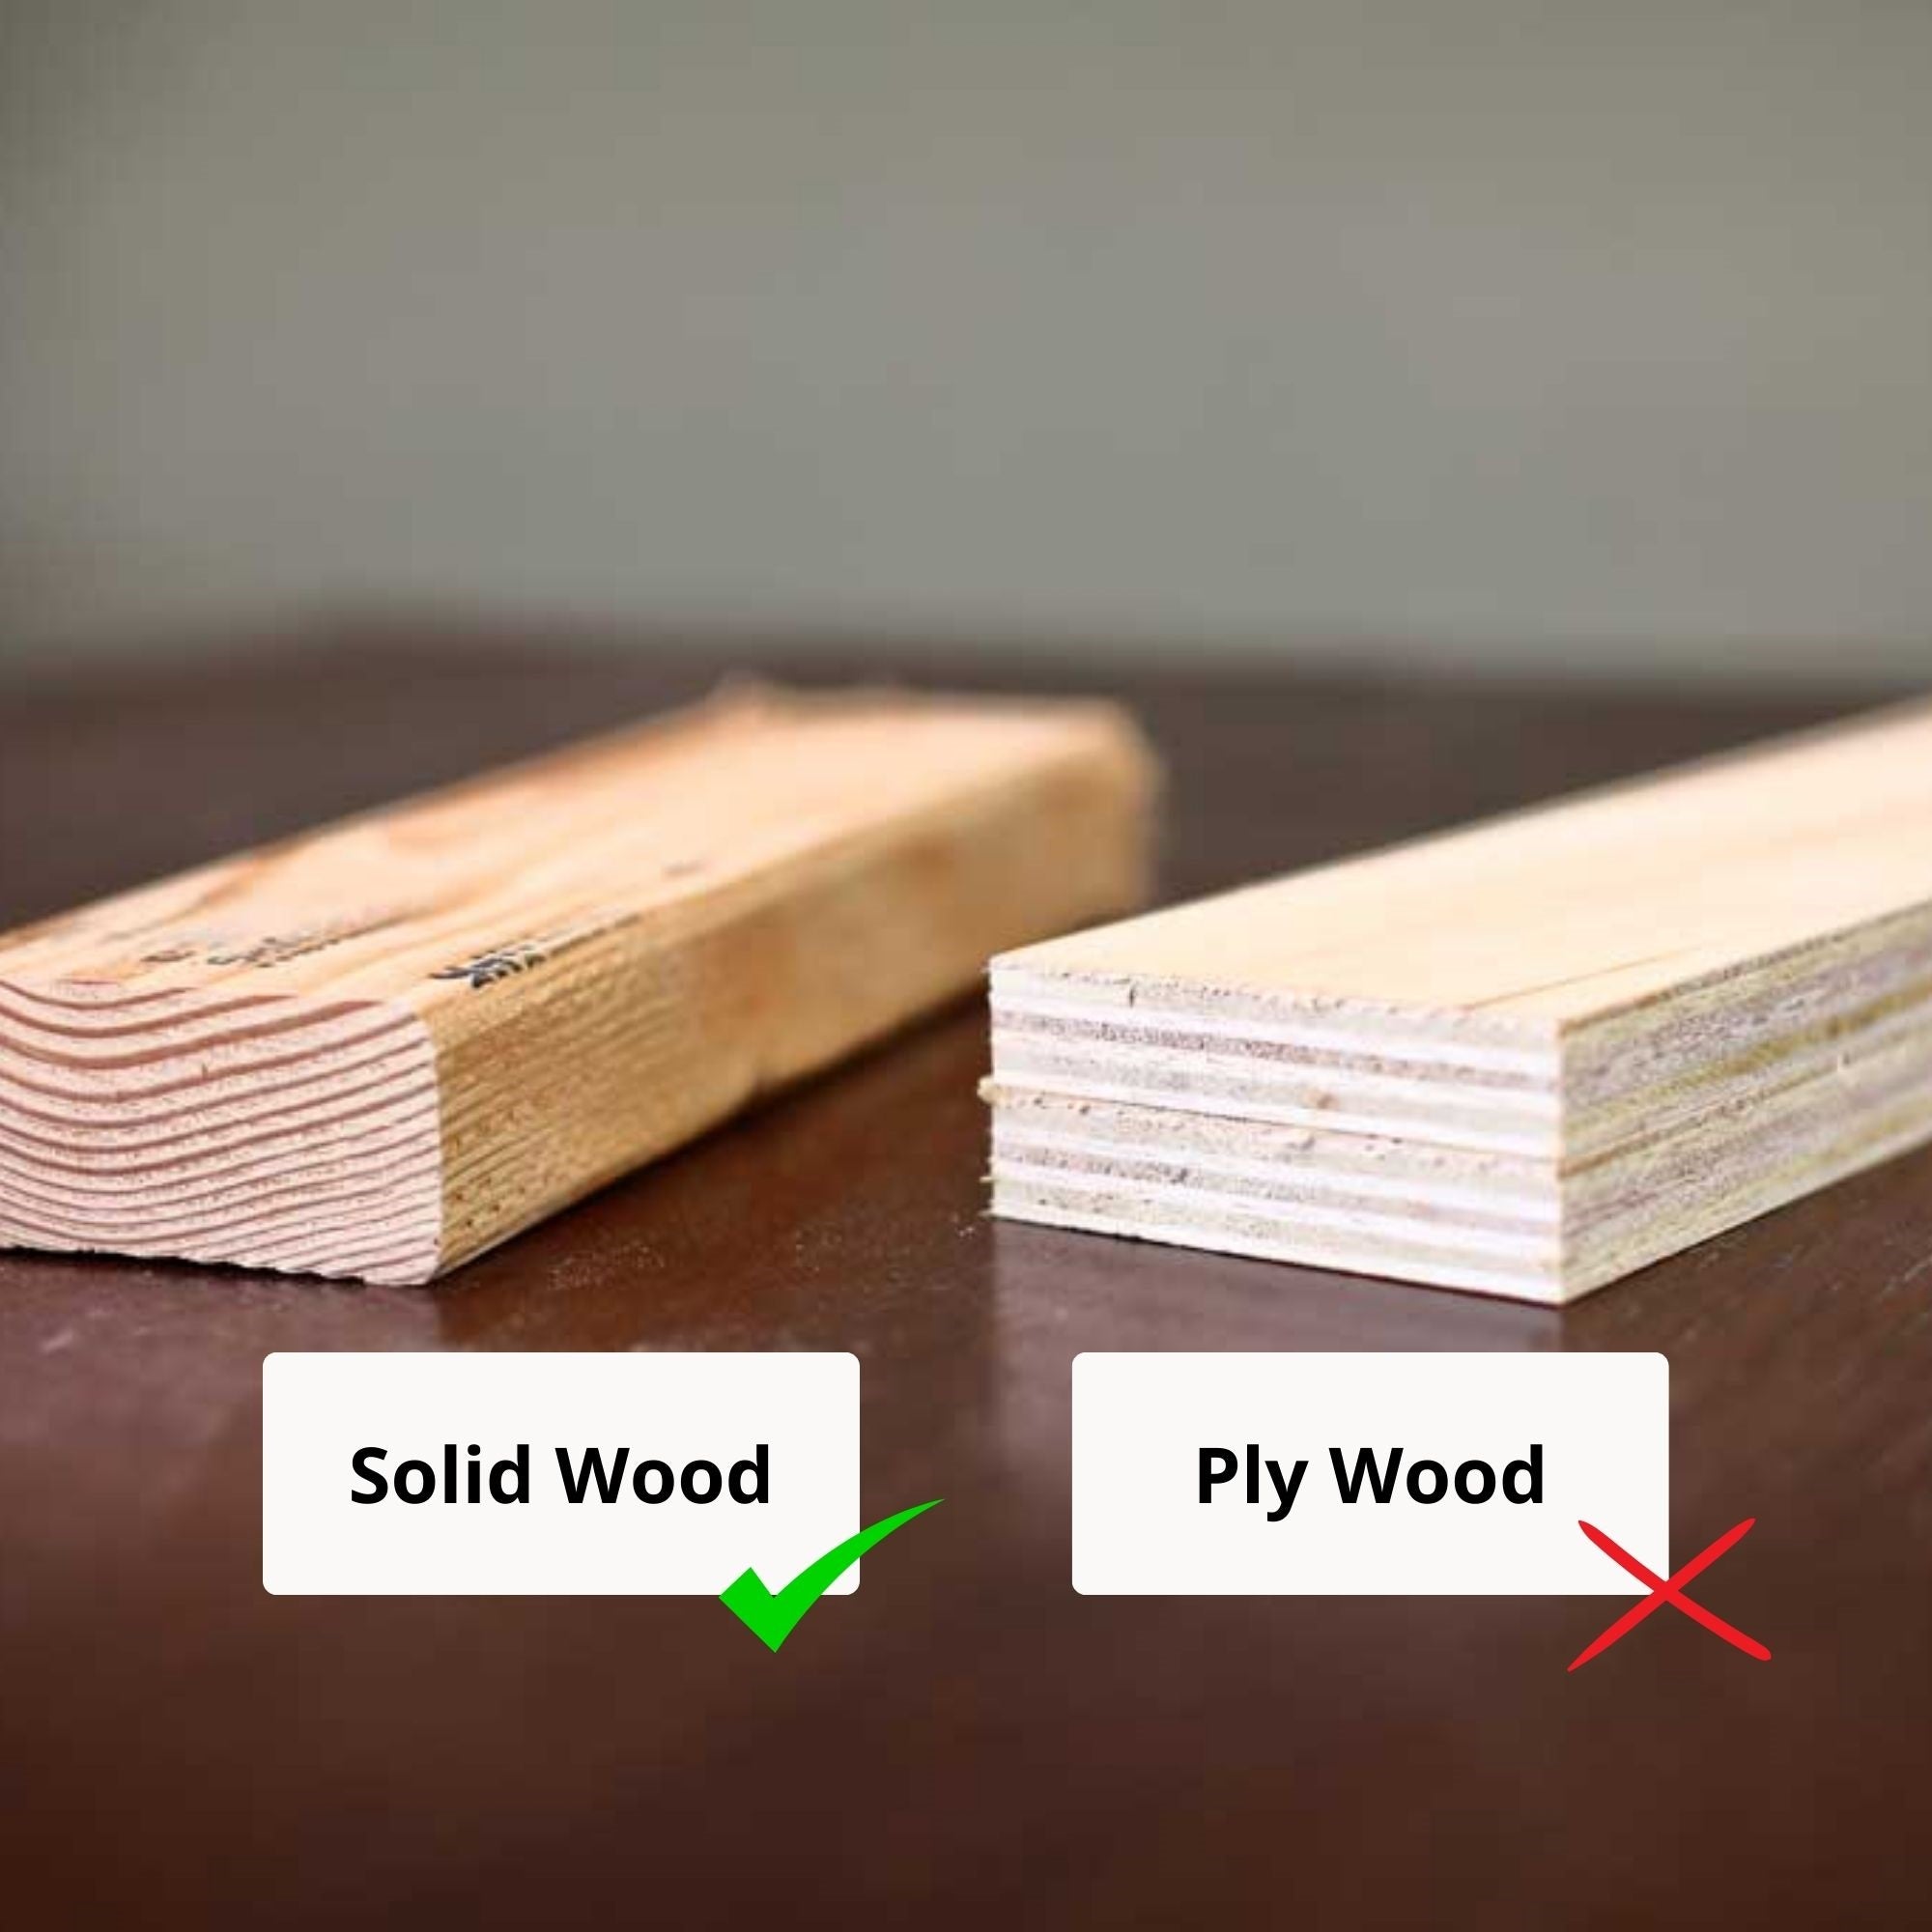 Comparison of solid wood vs plywood